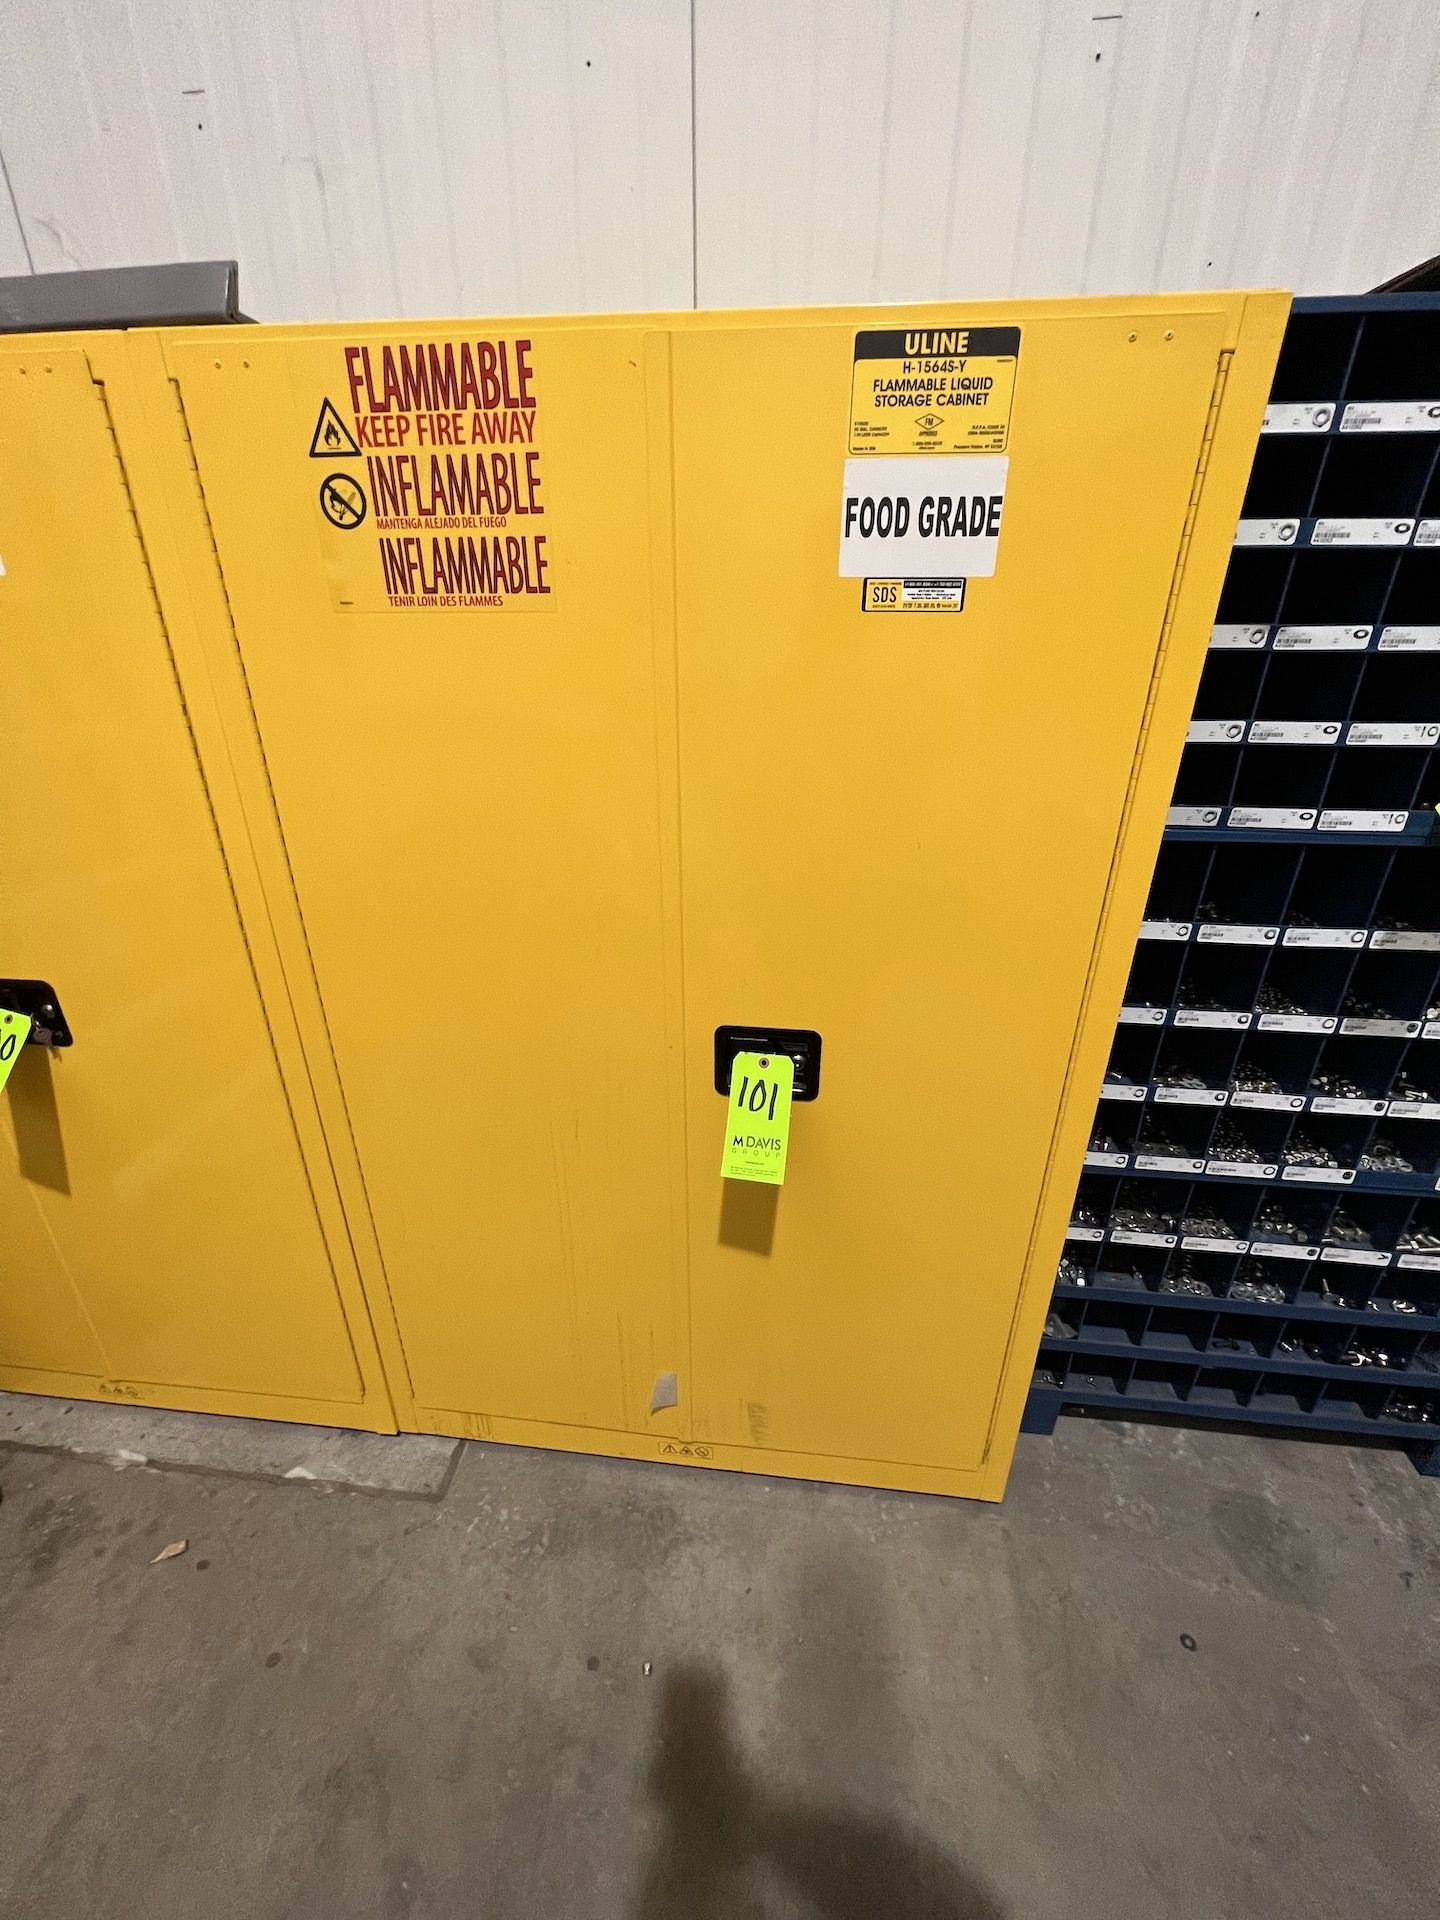 ULINE 2-DOOR FLAMABLE STORAGE CABINET (RIGGING & SIMPLE LOADING FEE $20.00) (NOTE: DOES NOT INCLUDE